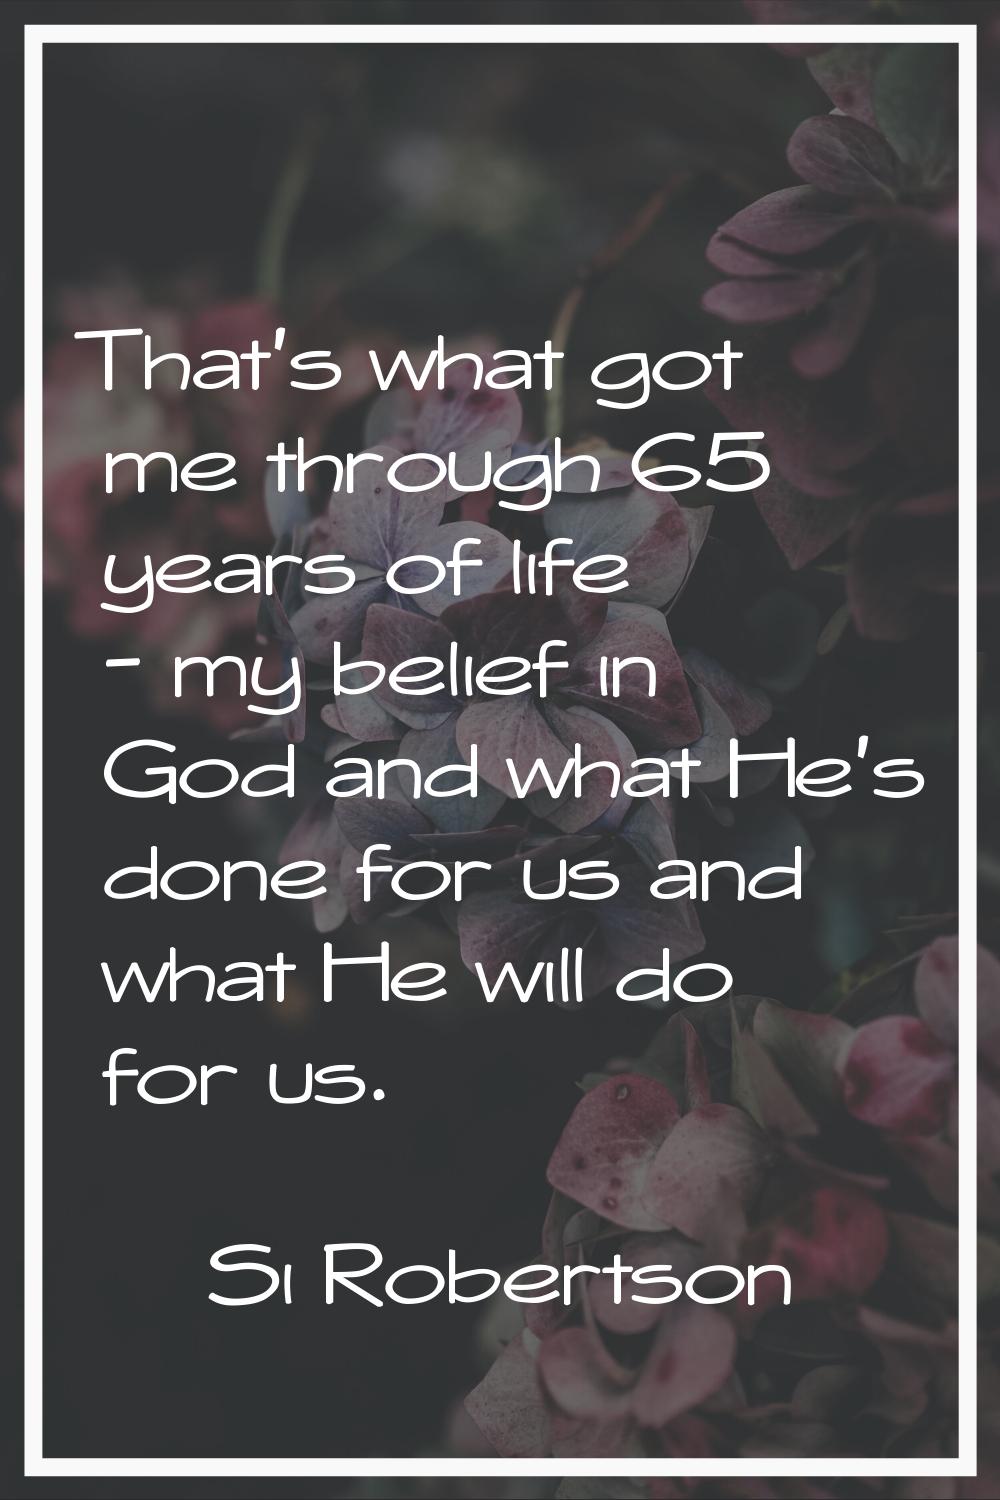 That's what got me through 65 years of life - my belief in God and what He's done for us and what H